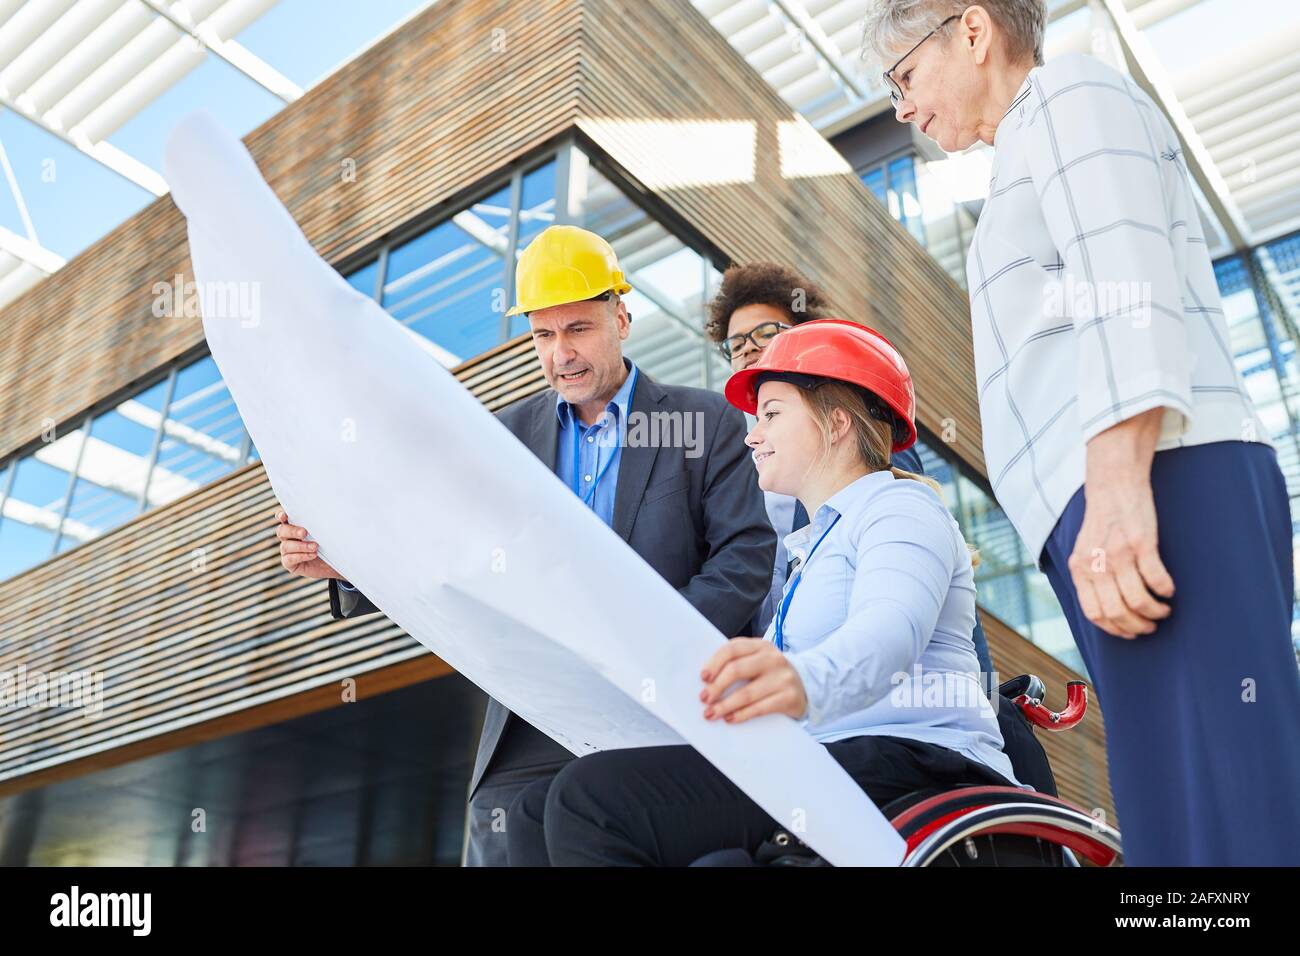 An engineering team with a blueprint and an architect in a wheelchair are planning an urban development project Stock Photo